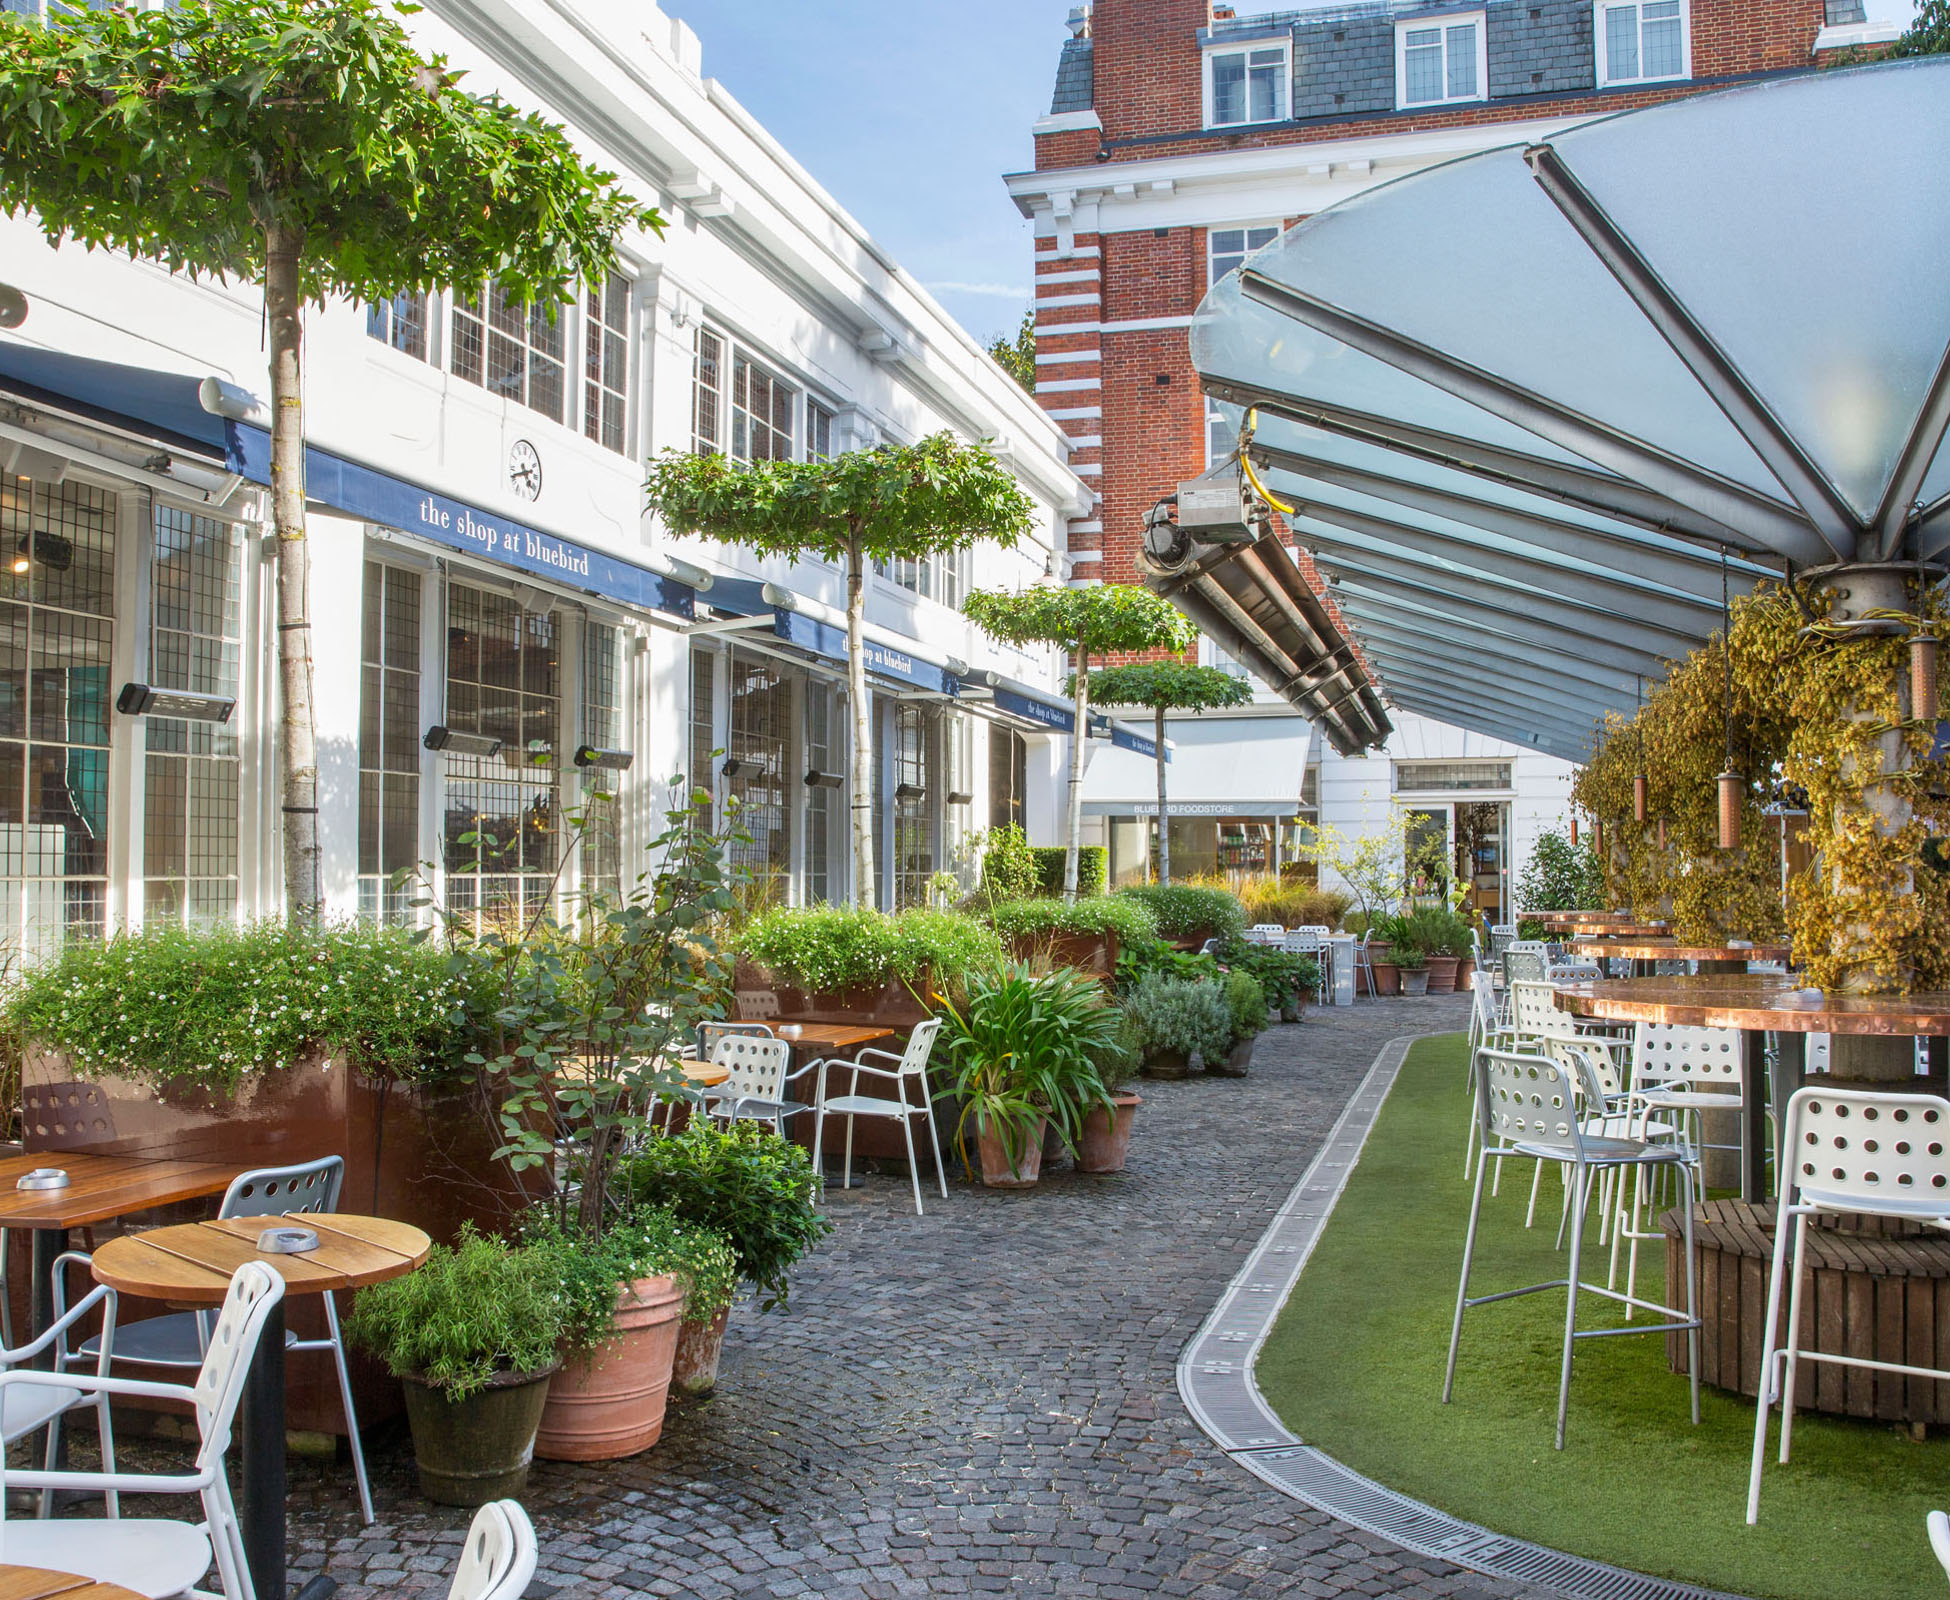 The Courtyard at Bluebird has been designed to create intimate spaces between the “parasol’ trees and clusters of pots